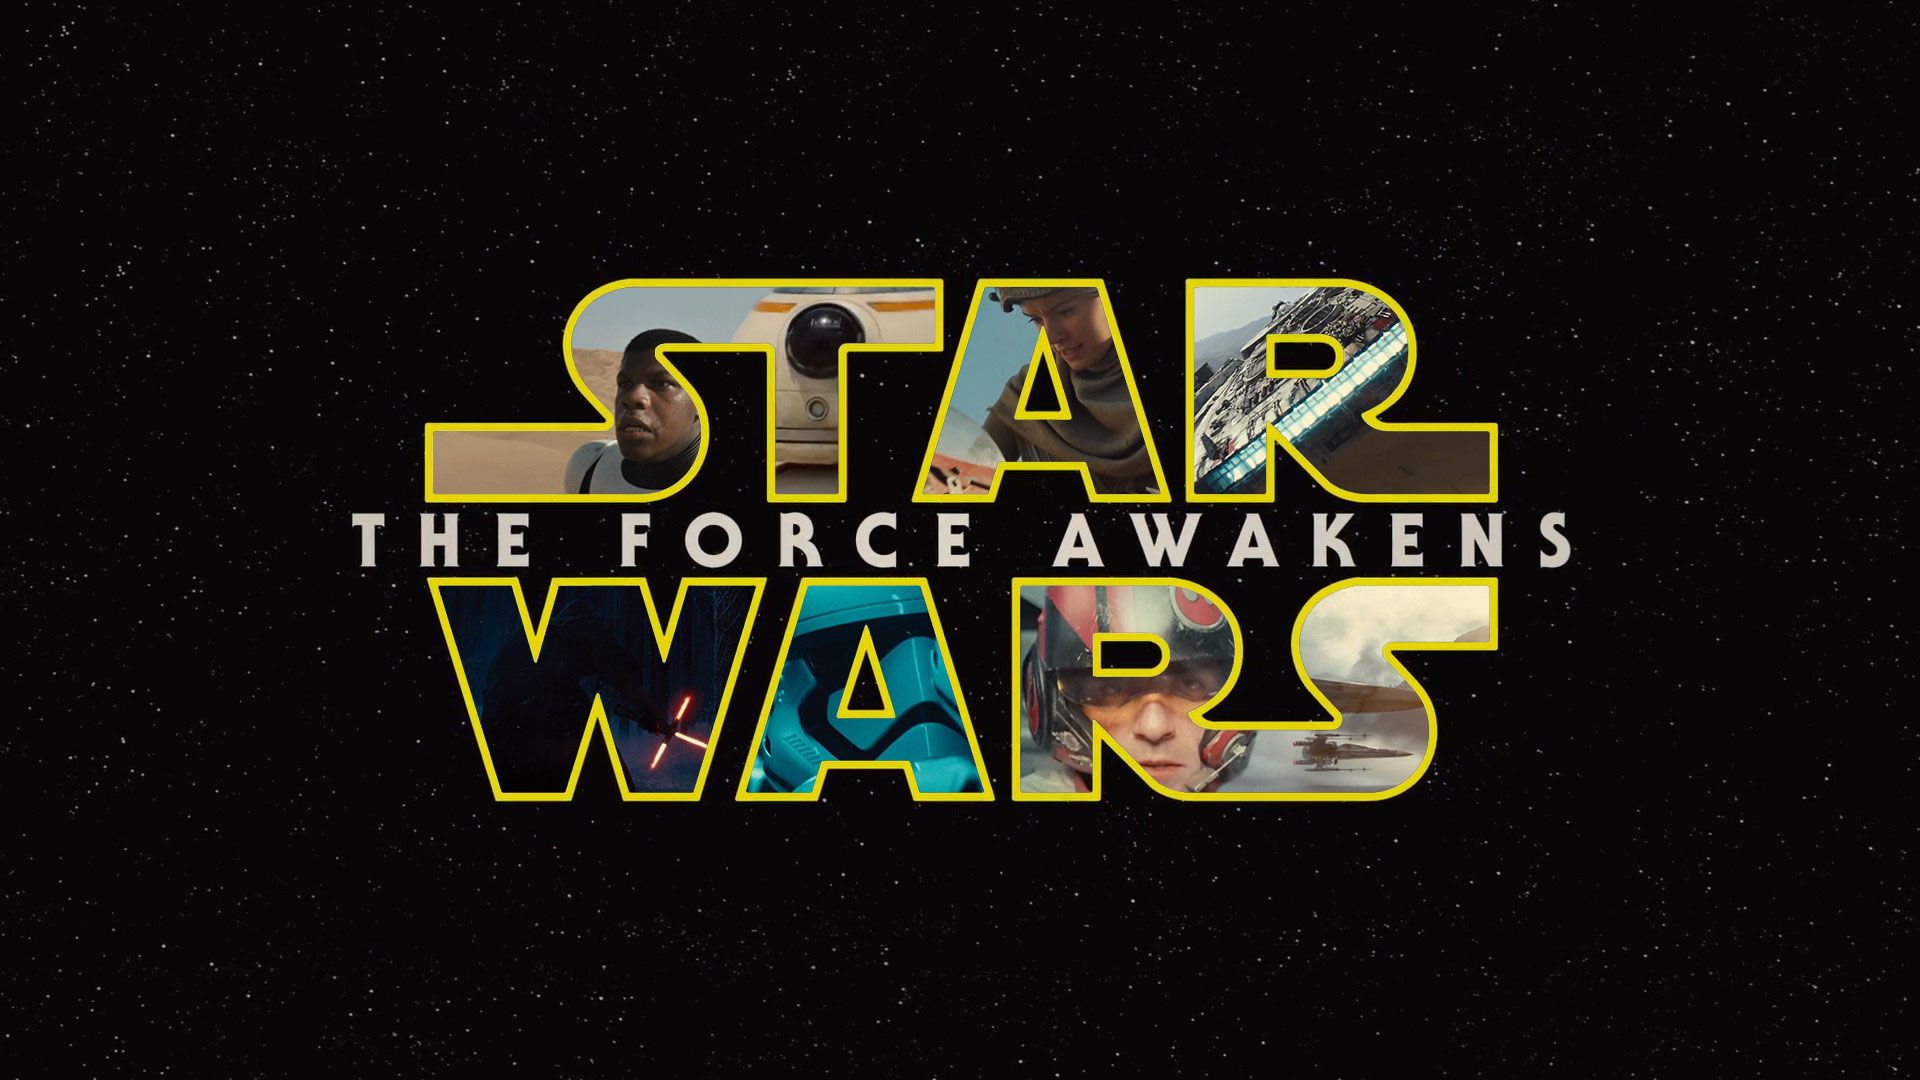 Get ready for the Force Awakens with these 26 Star Wars wallpaper!